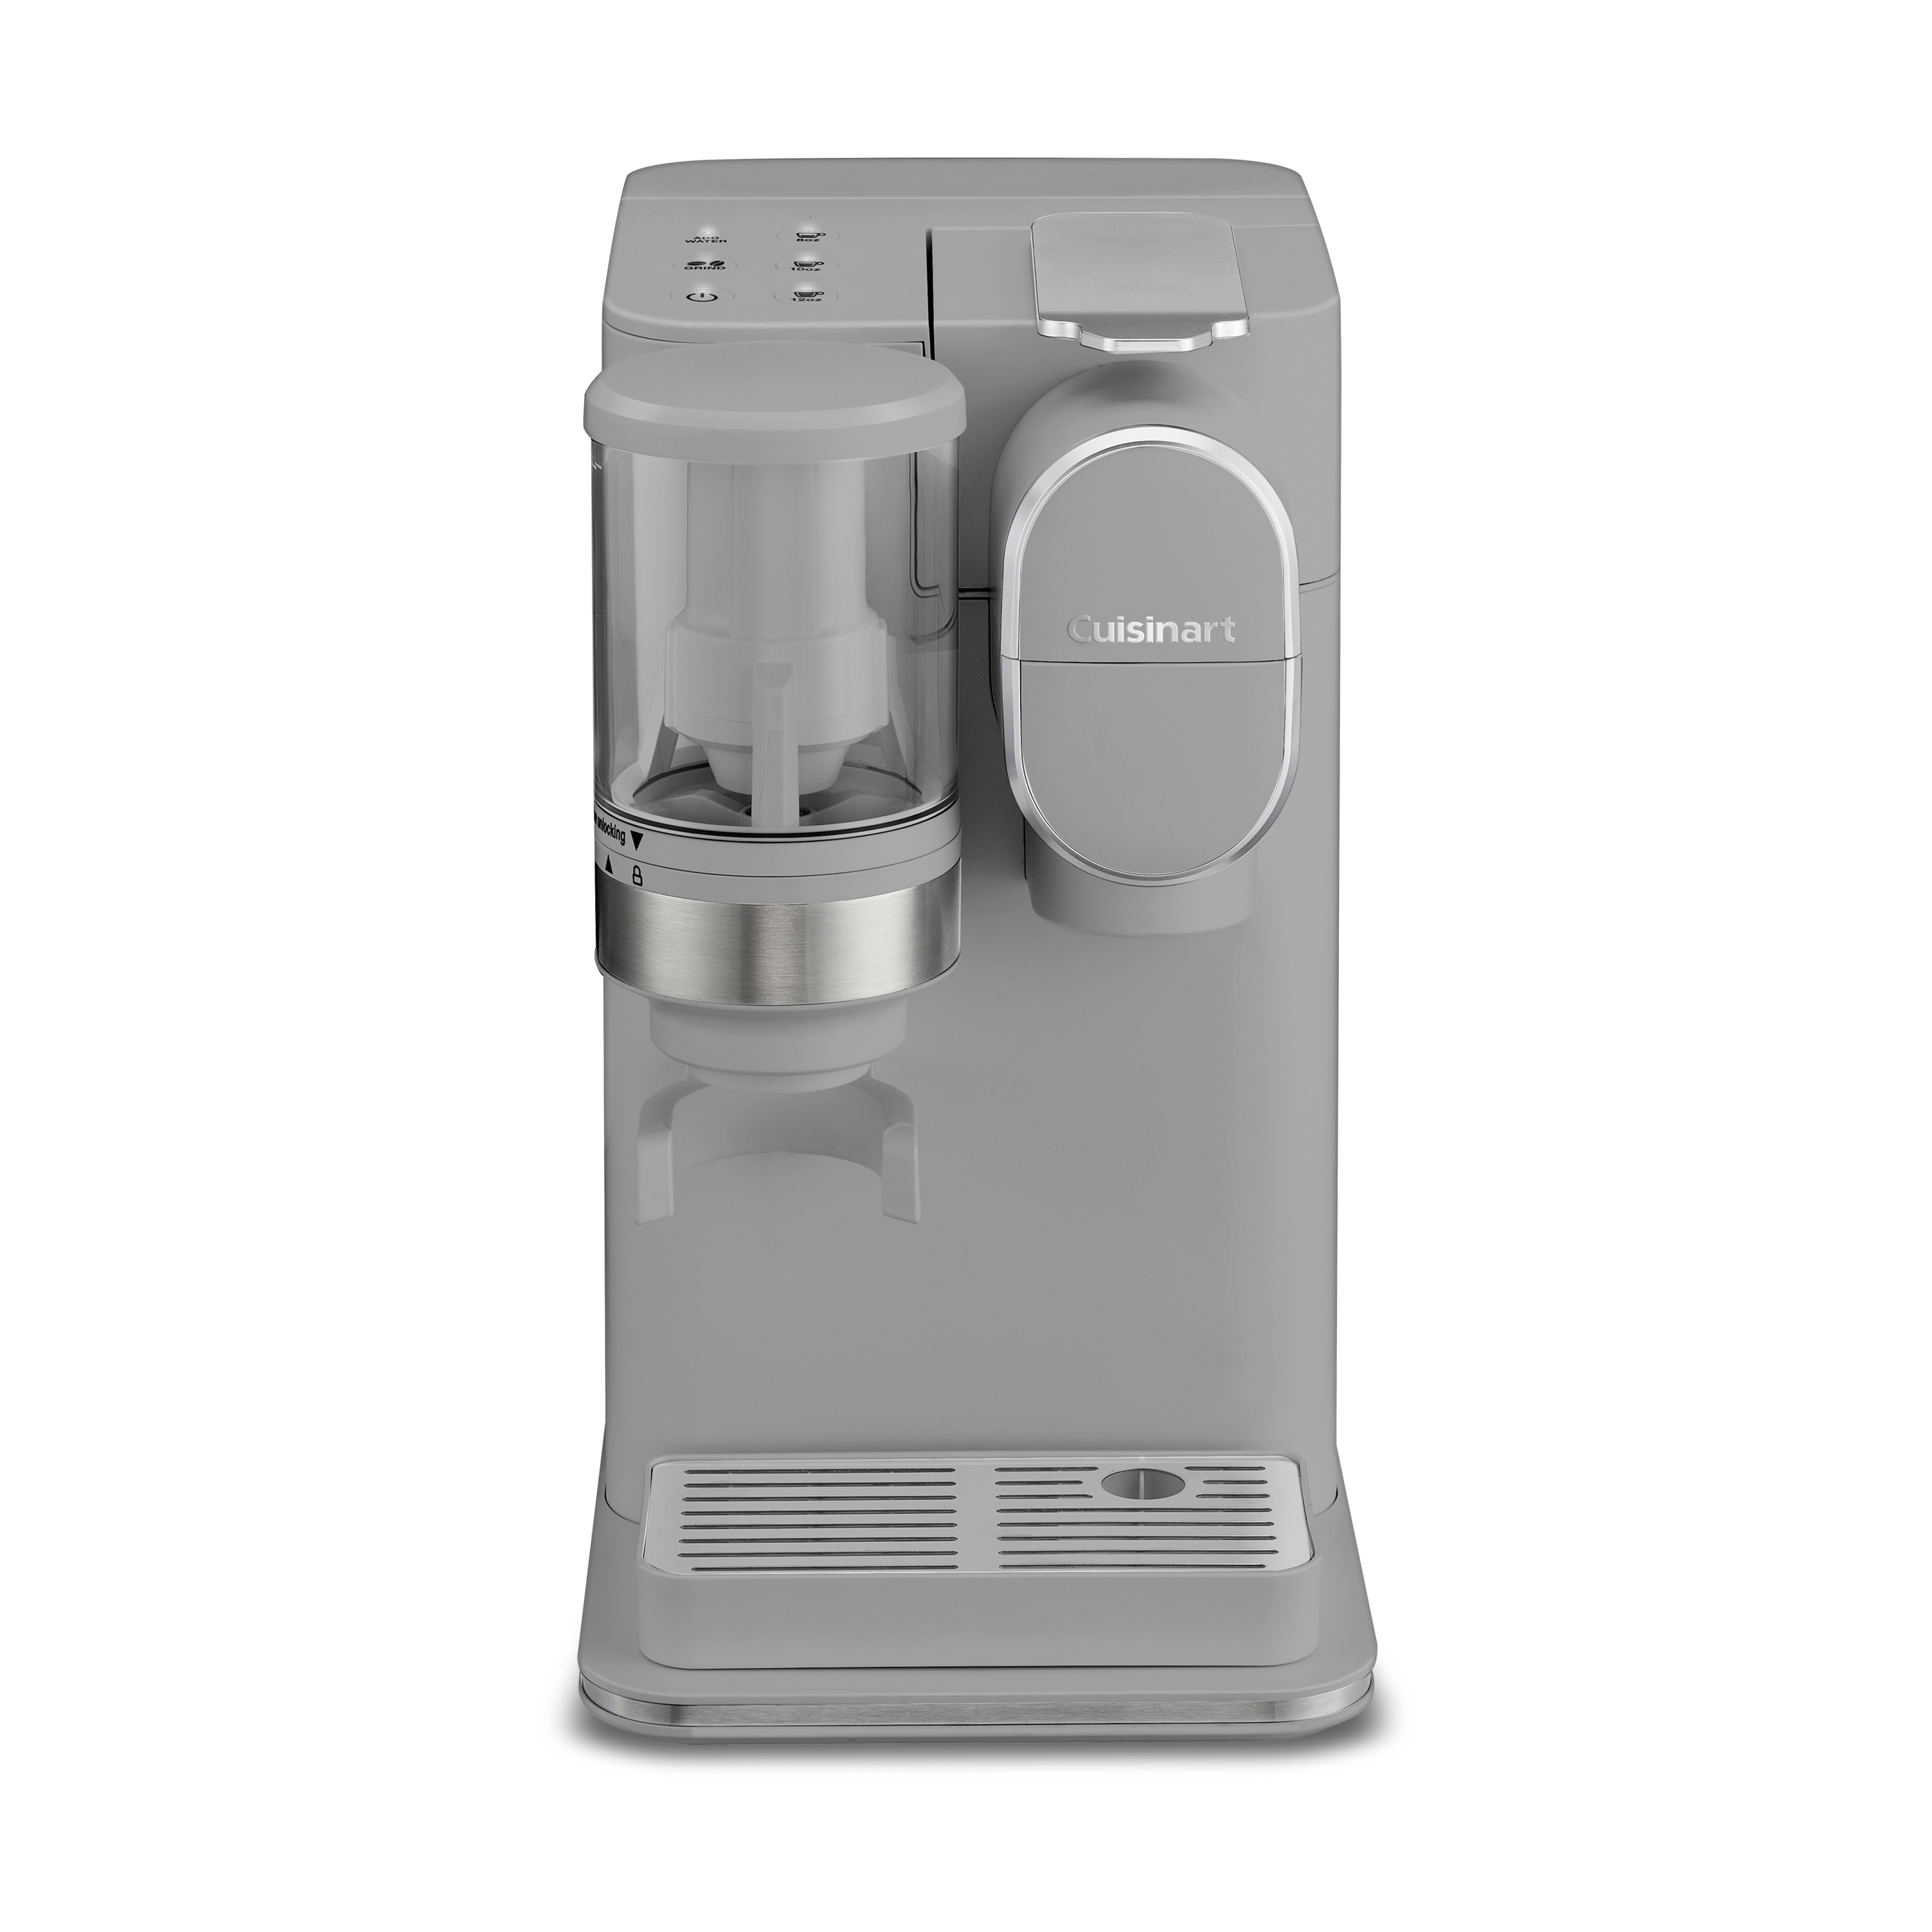 Discontinued Grind & Brew™ 12 Cup Automatic Coffeemaker